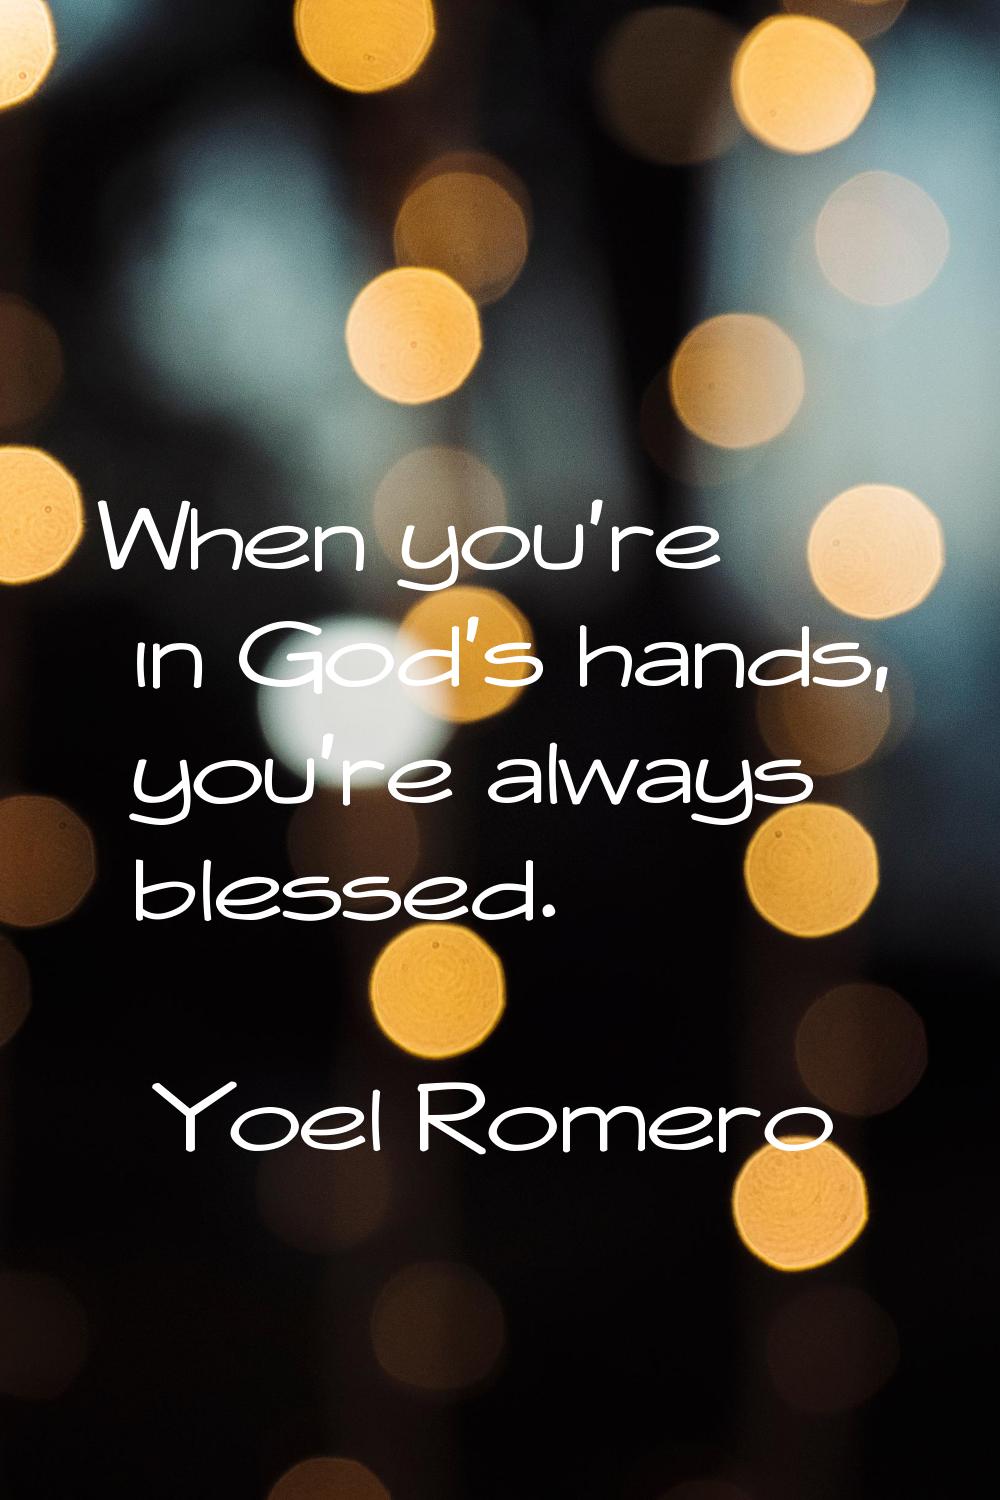 When you're in God's hands, you're always blessed.